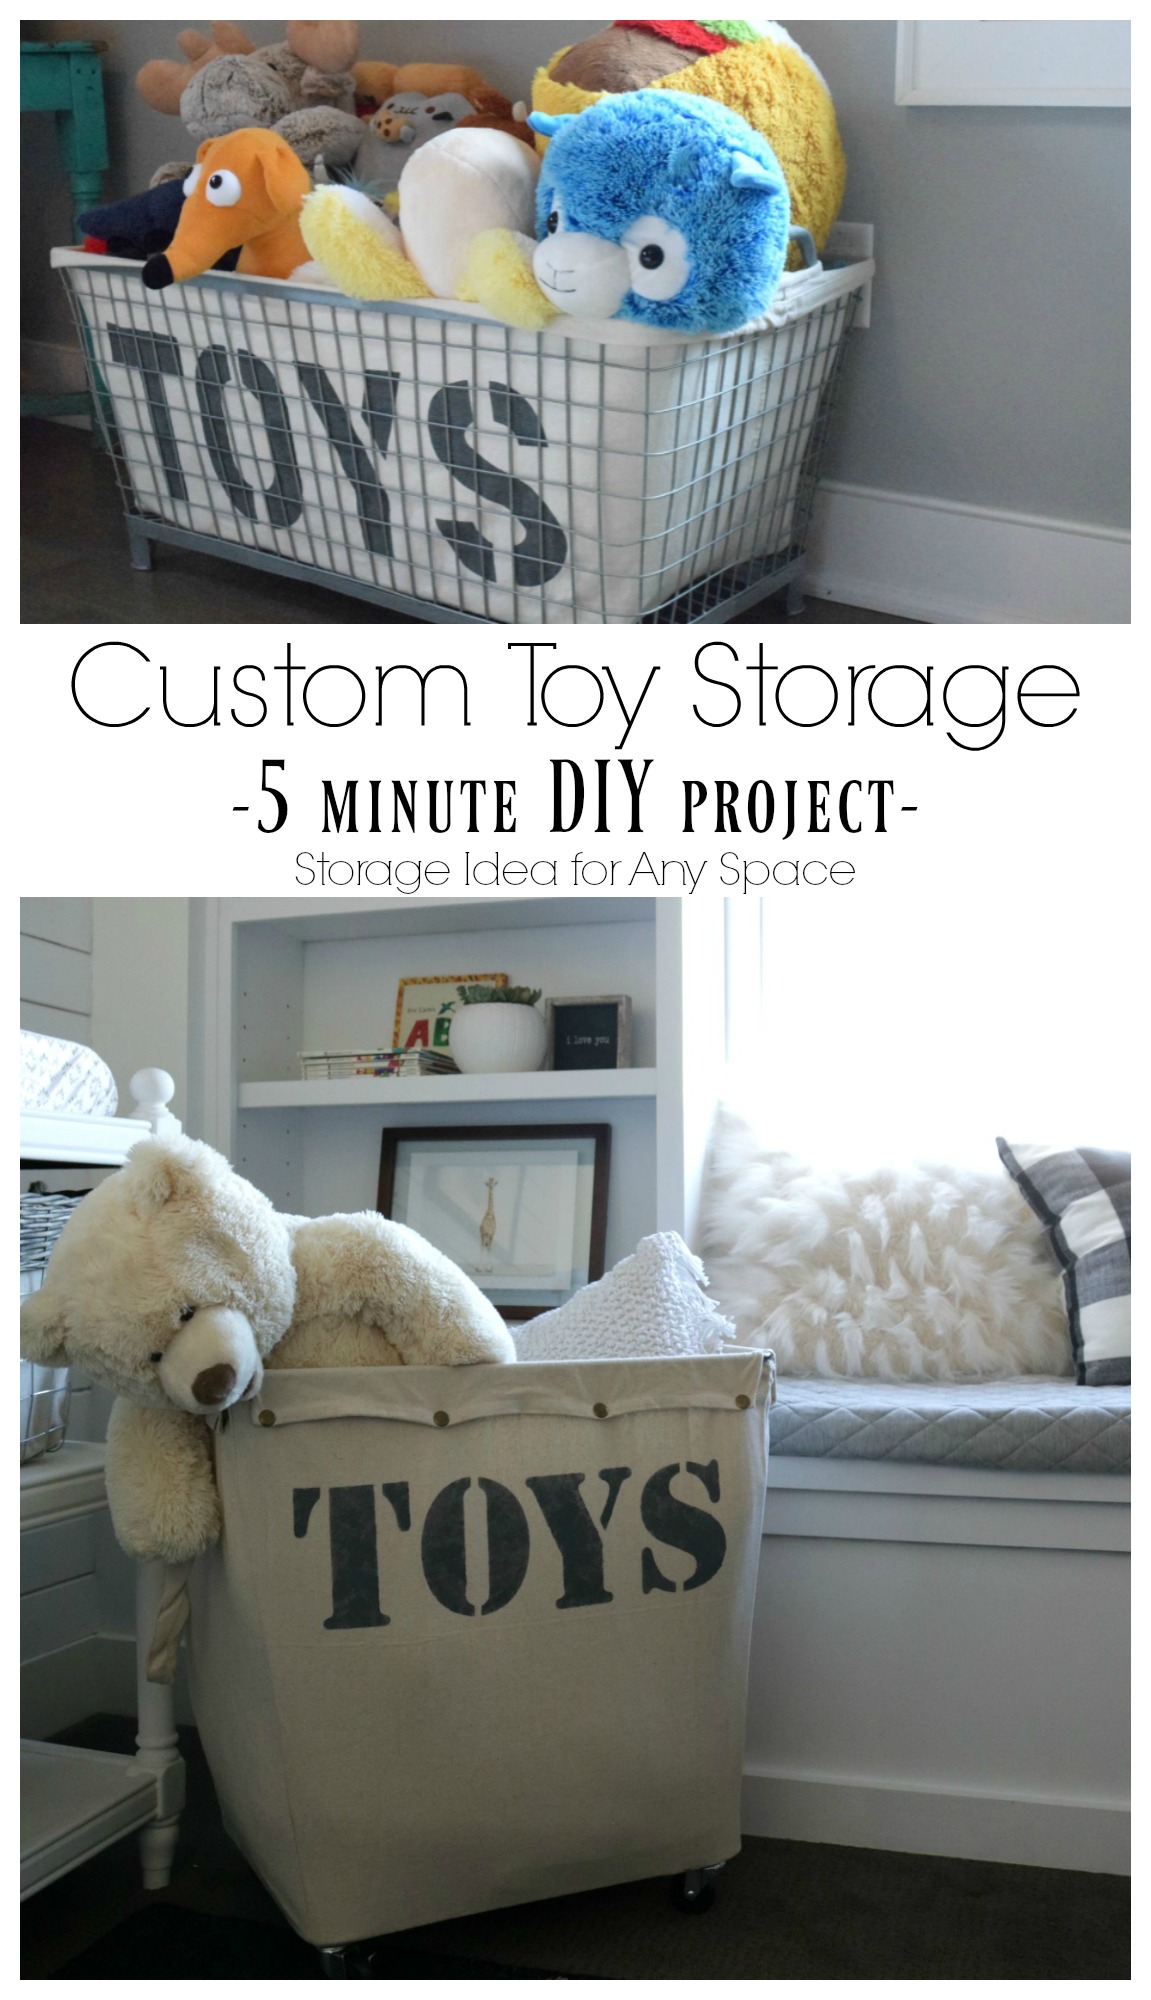 Custom Toy Storage Solution- 5 Minute Project